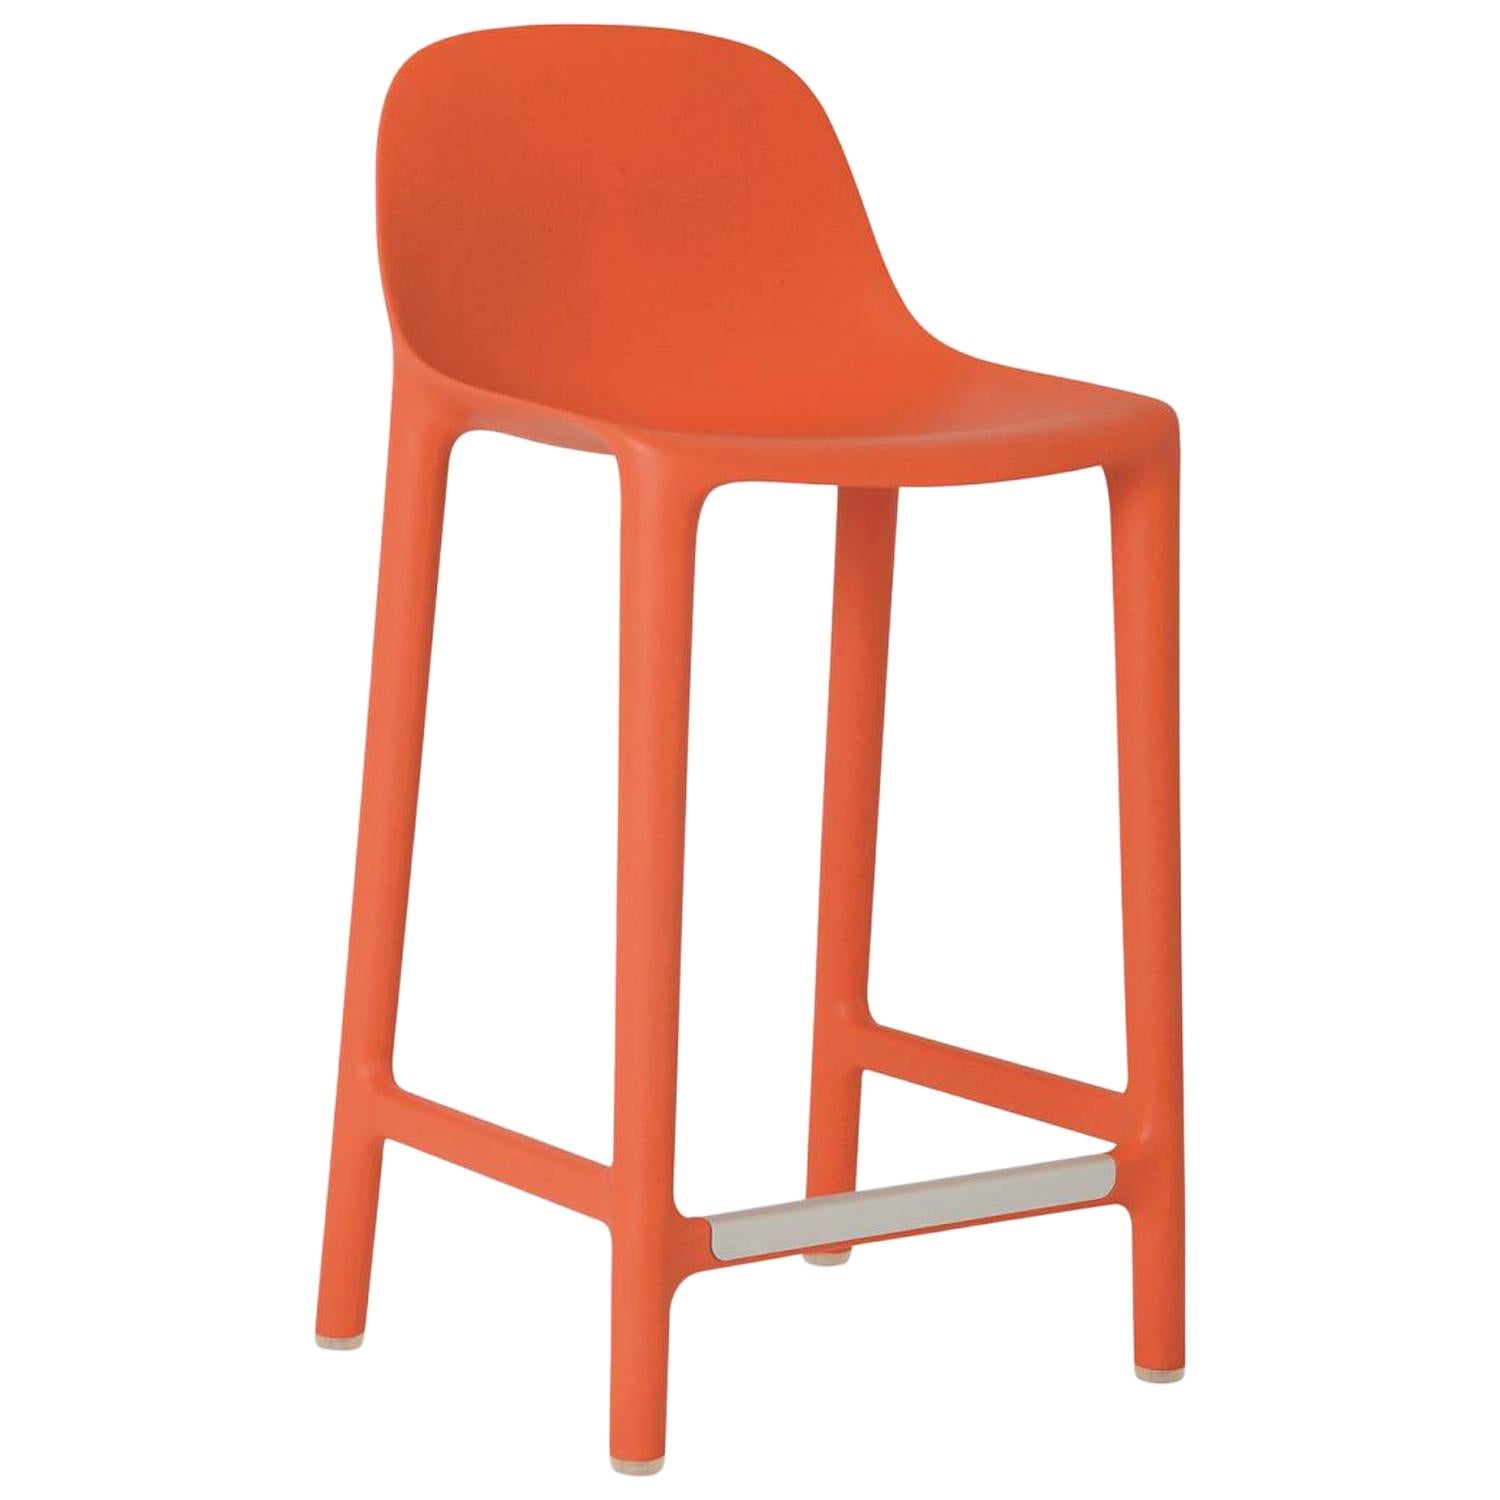 Emeco Broom Counter Stool in Orange by Philippe Starck